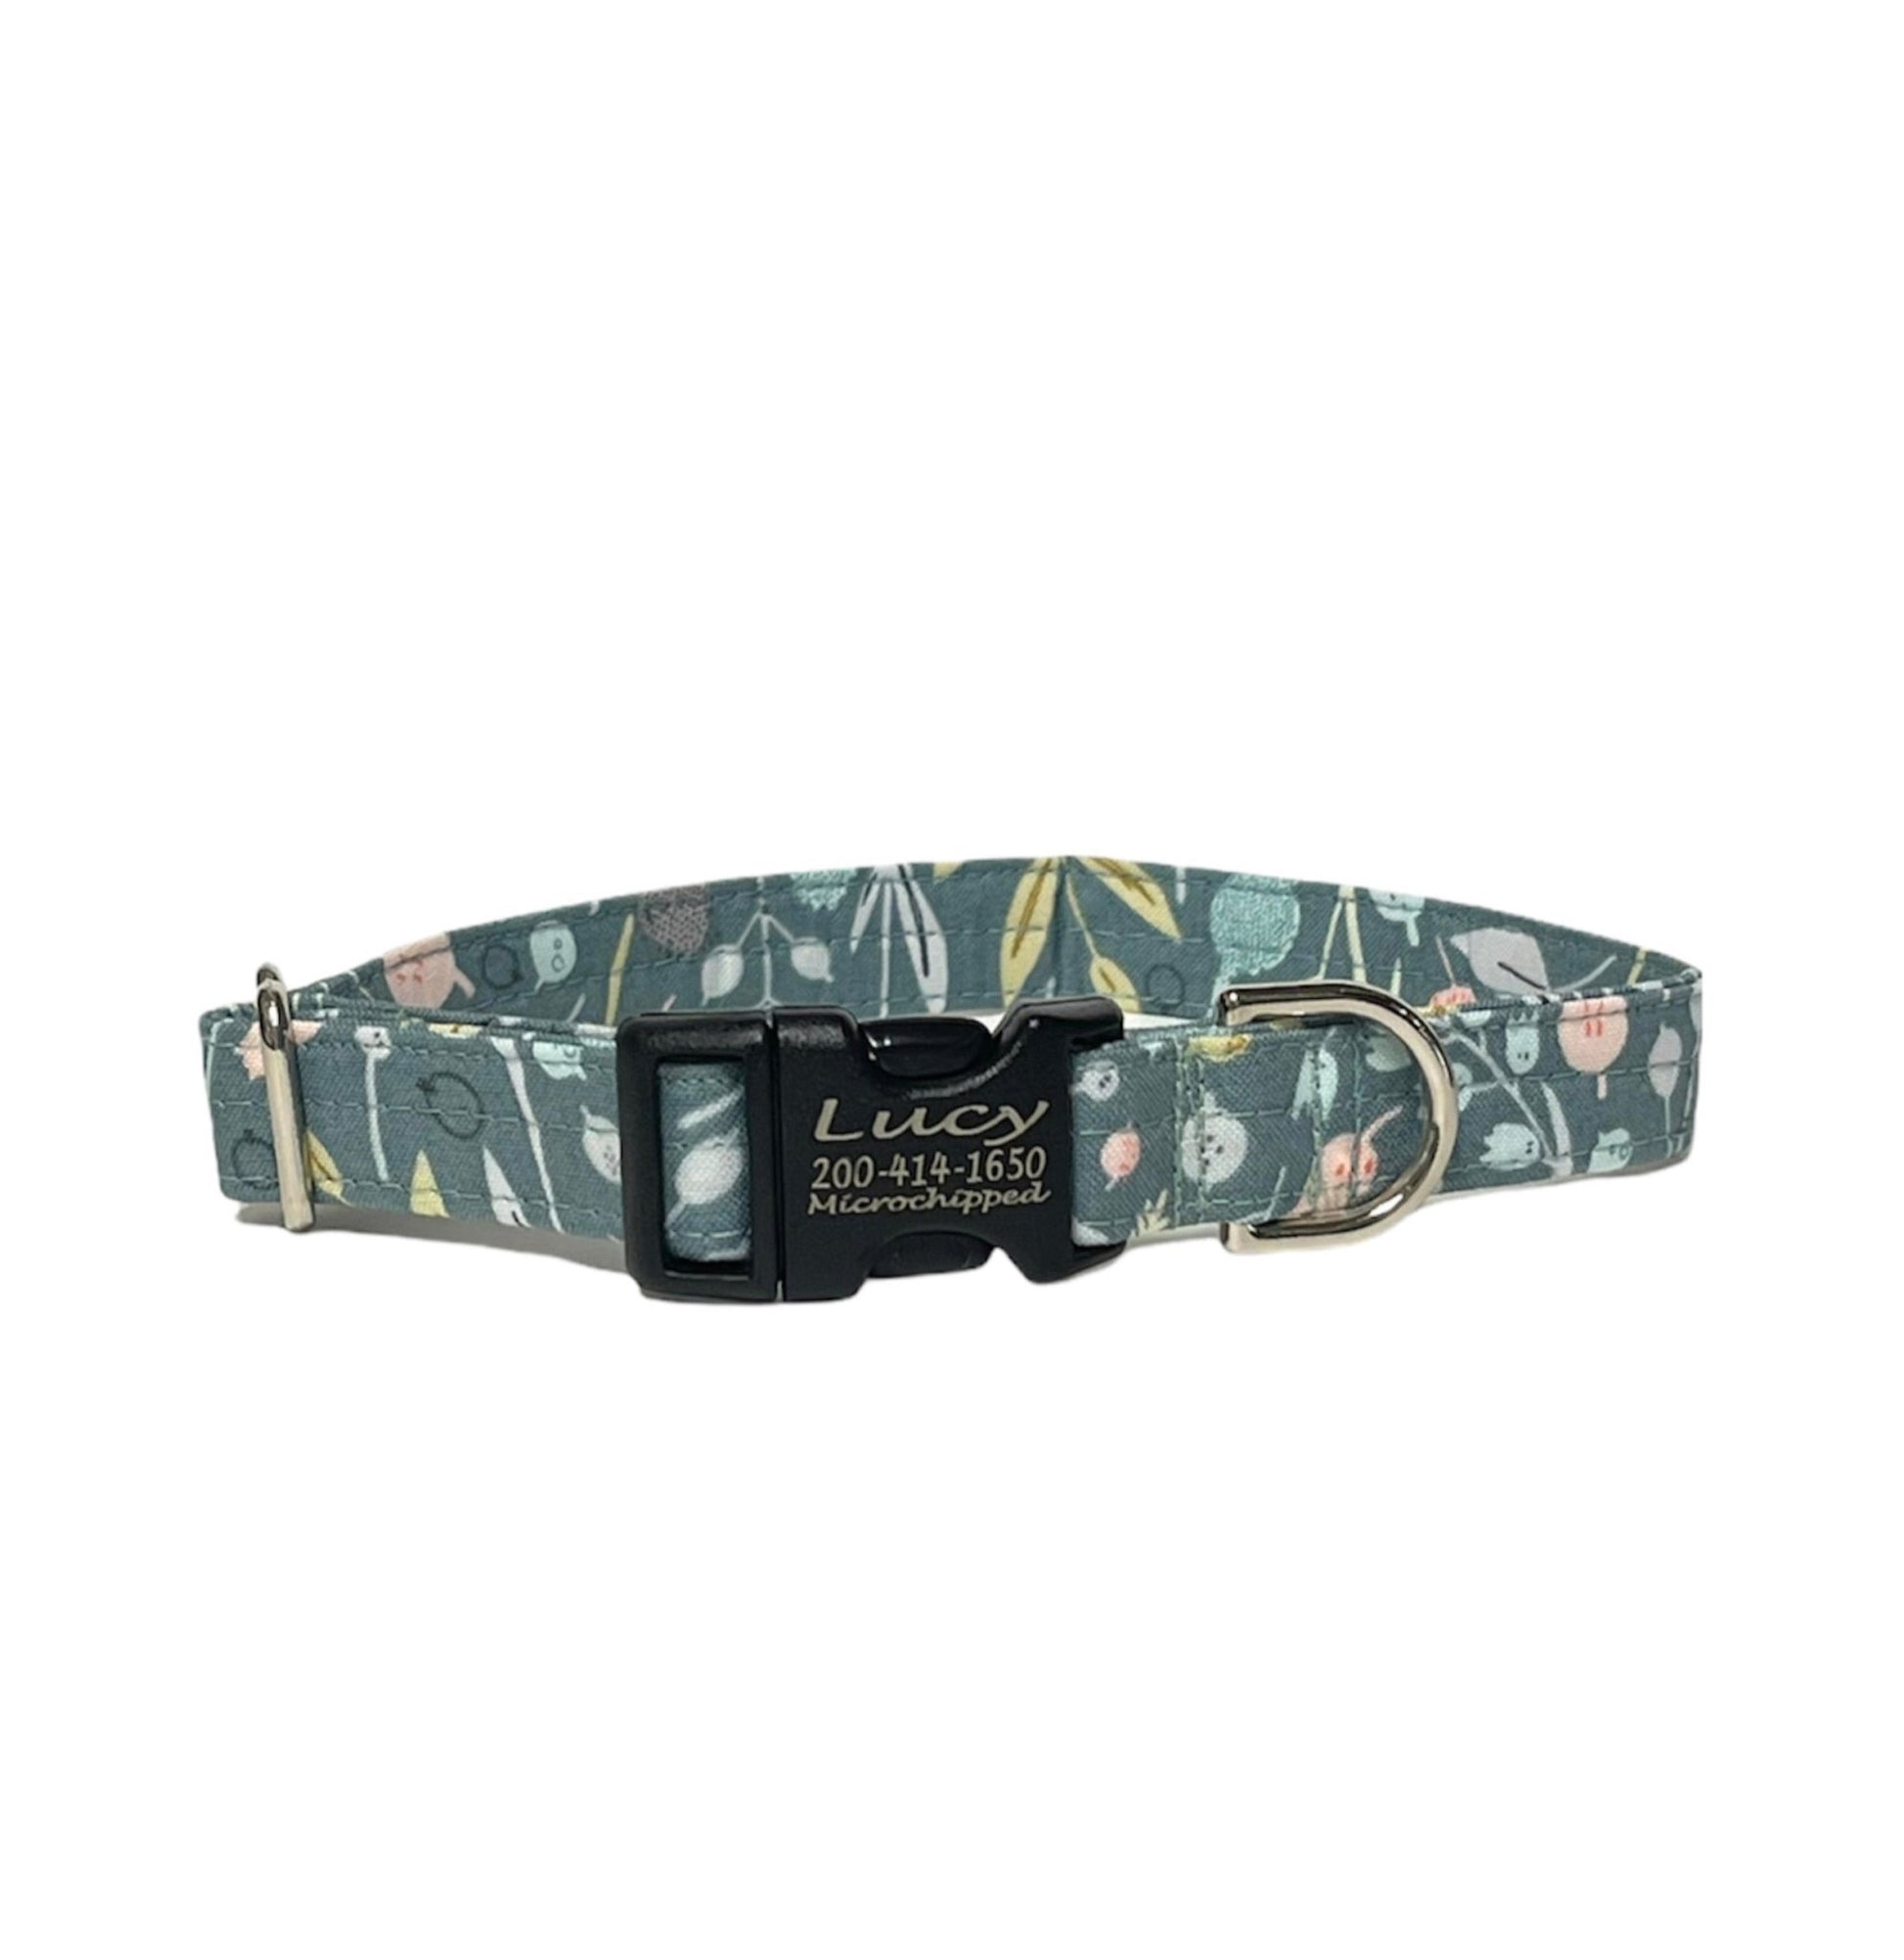 Meadow Floral Dog Collar - Fabric Style - muttsnbones